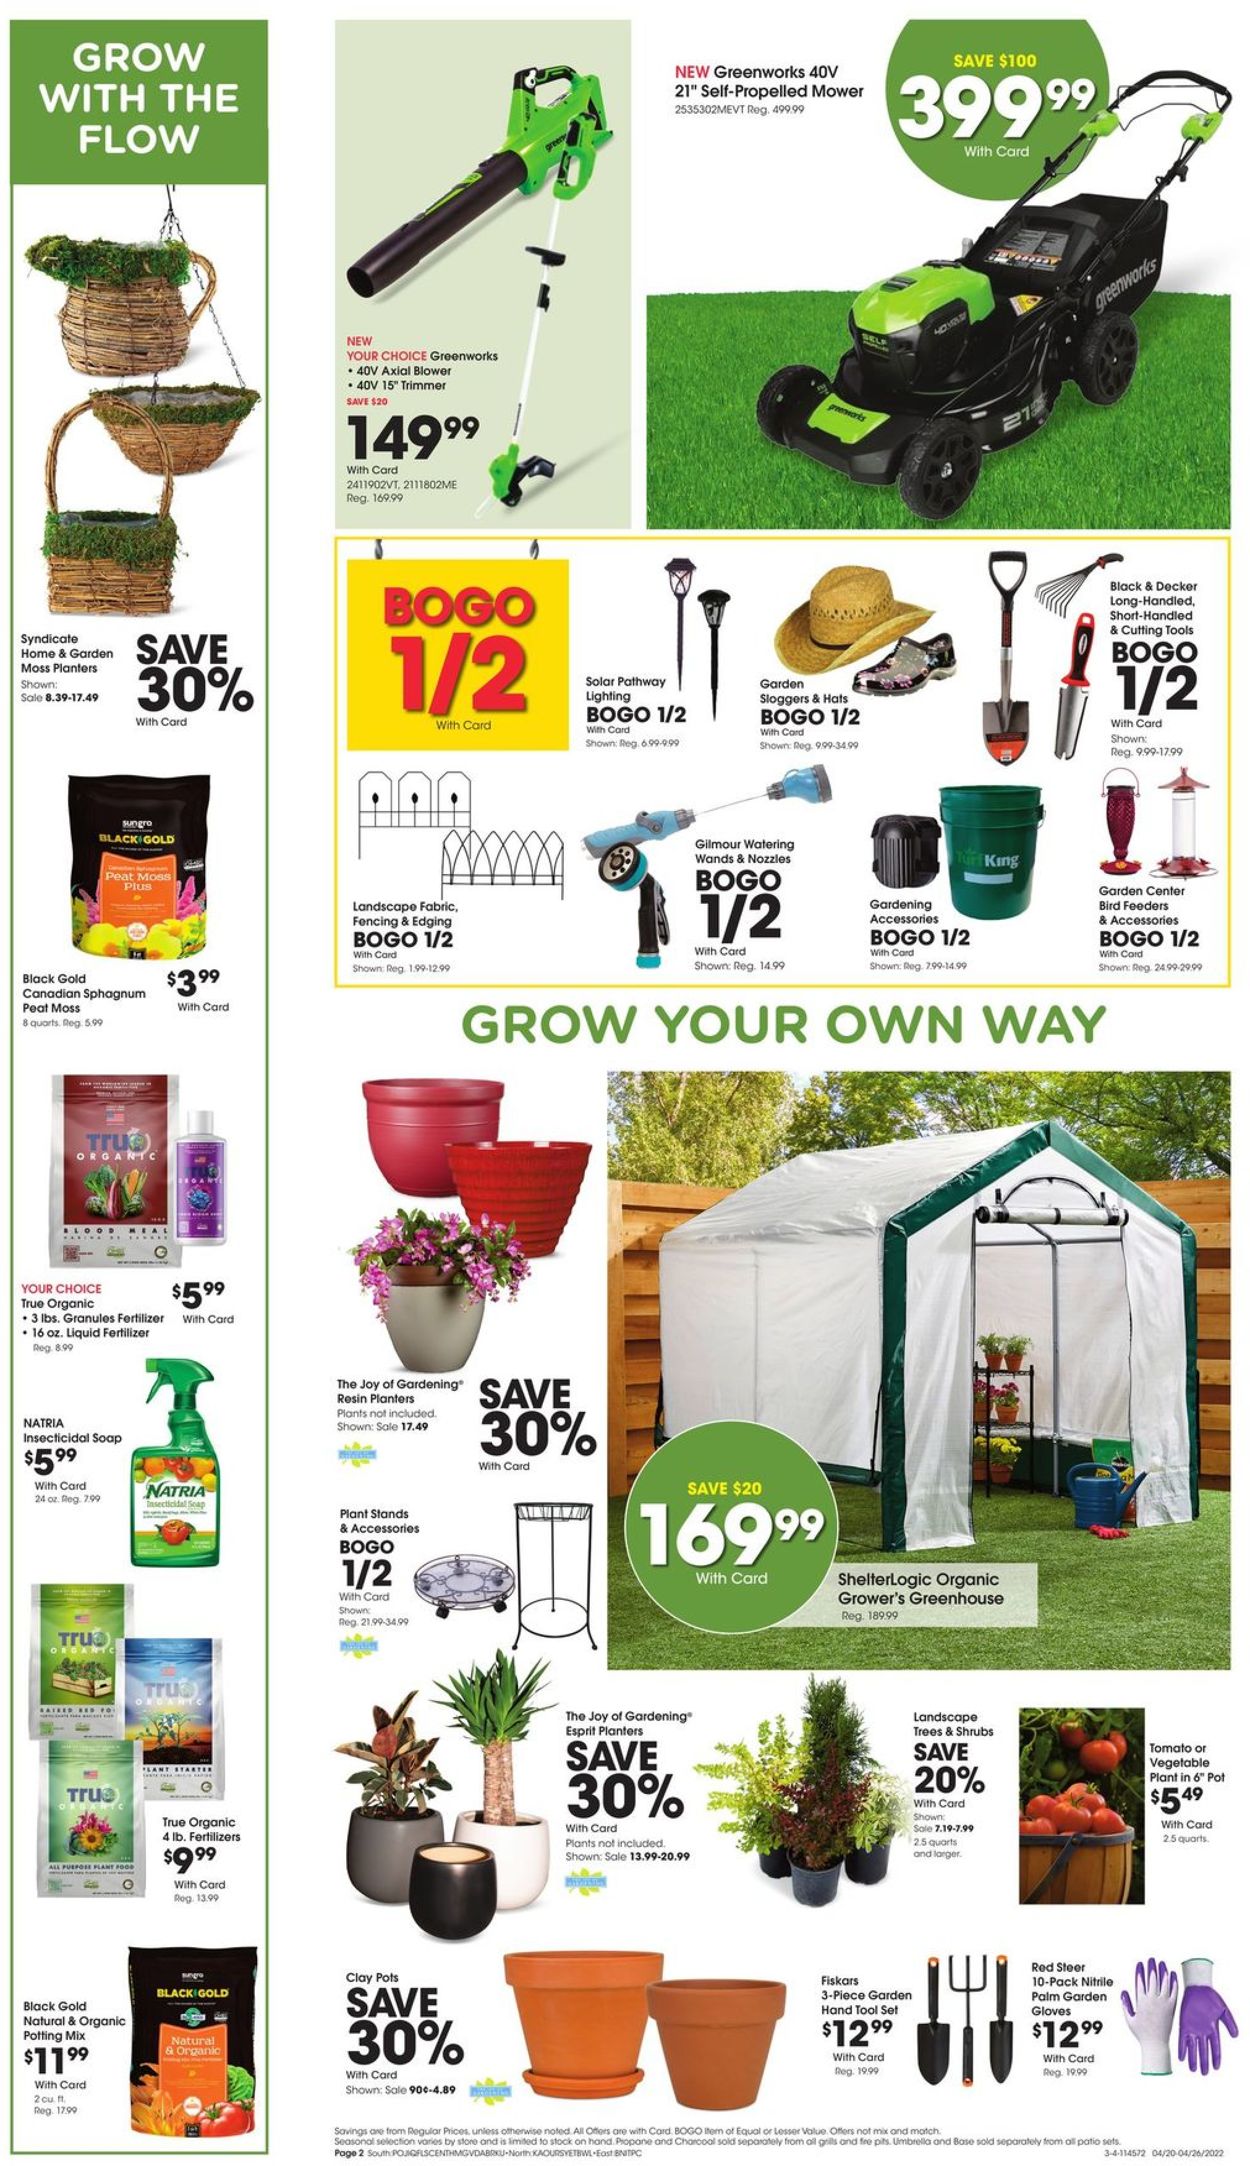 Fred Meyer Weekly Ad Circular - valid 04/20-04/26/2022 (Page 2)